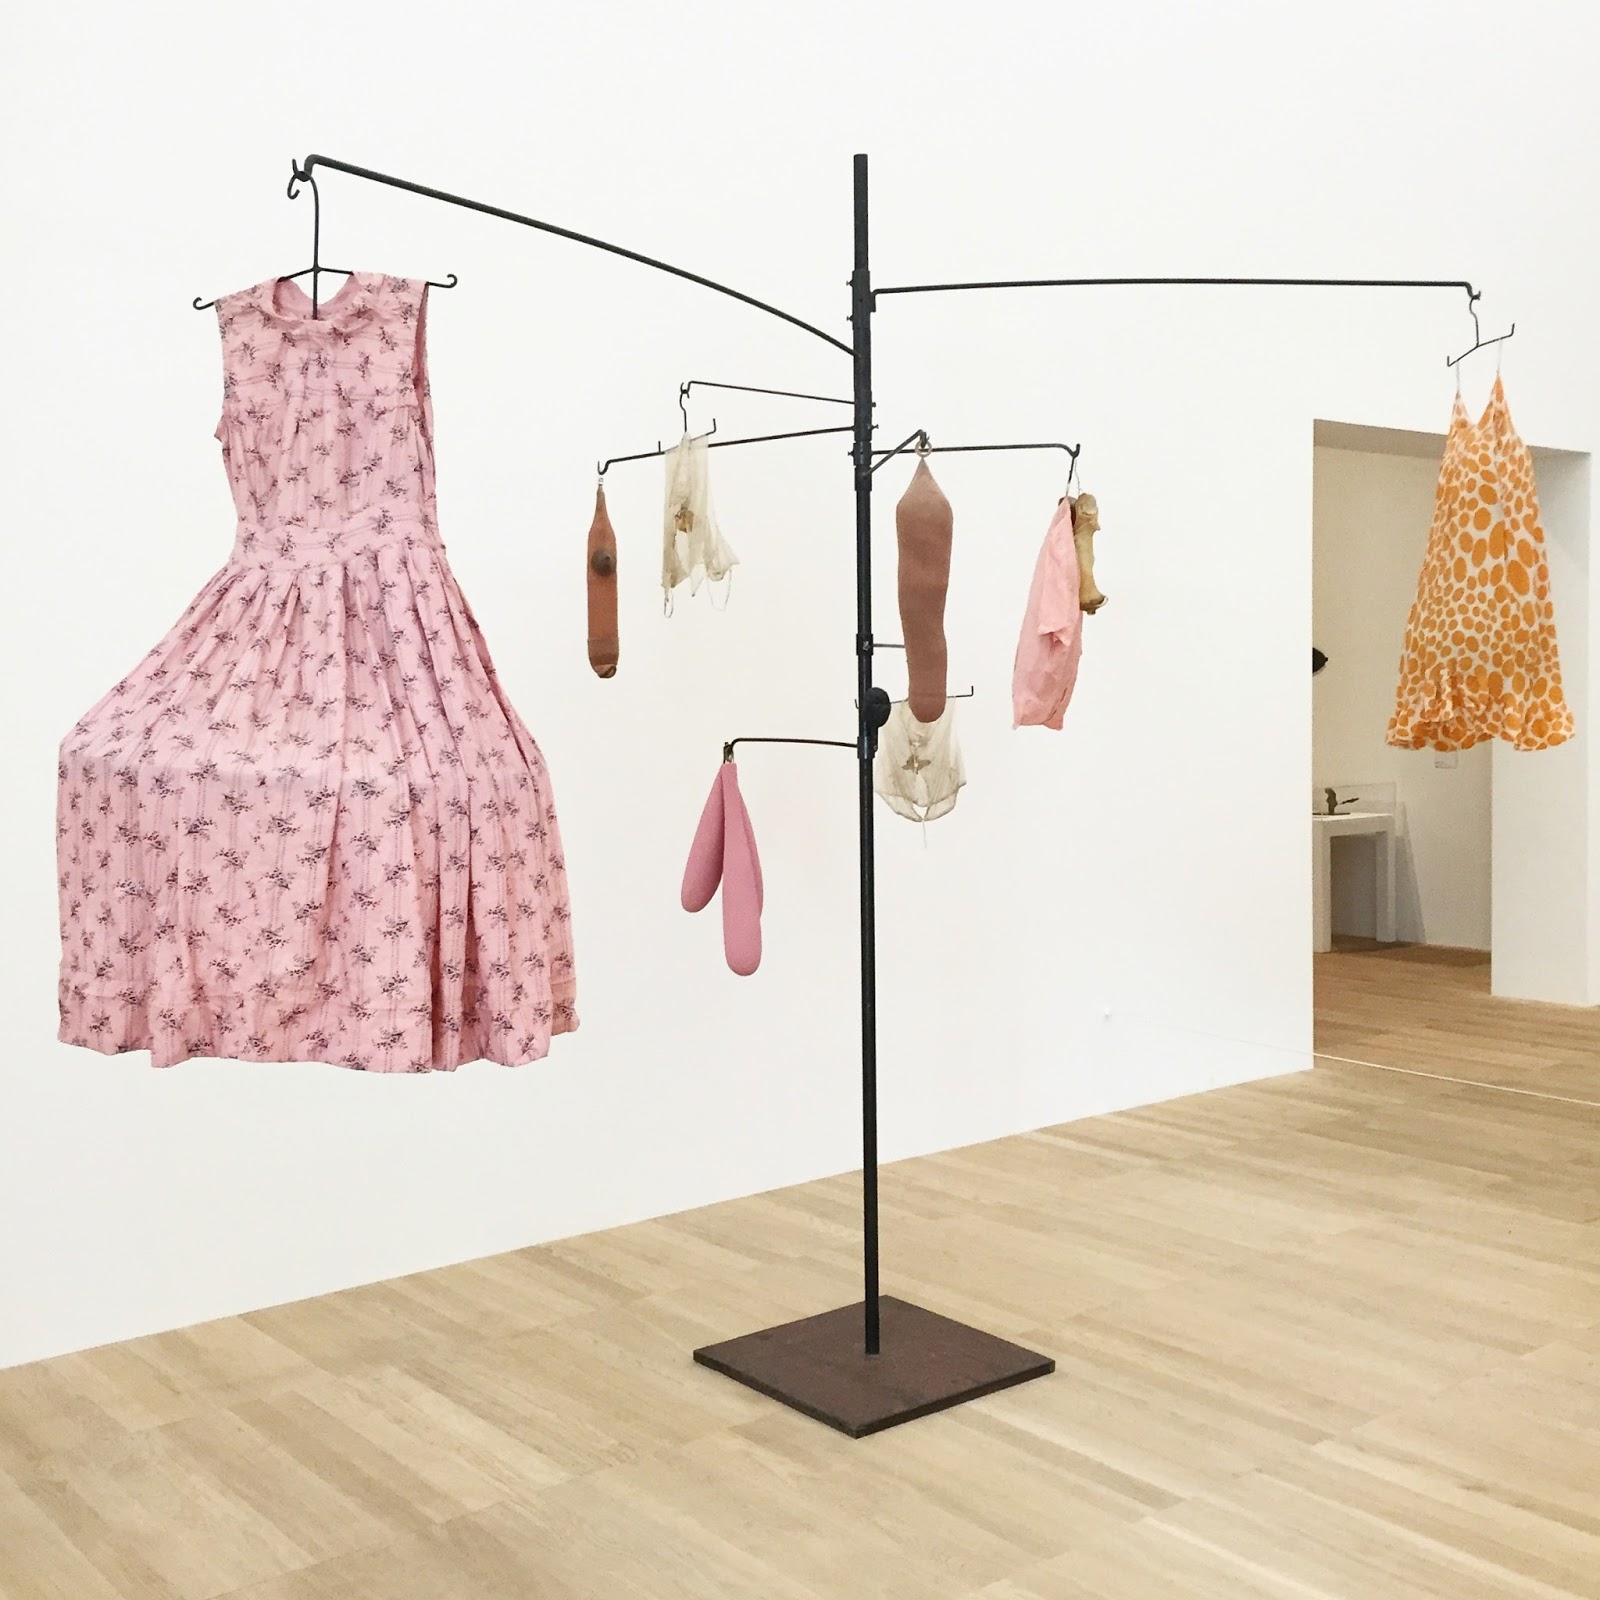 Pippa's Cabinet: Louise Bourgeois at the Tate Modern